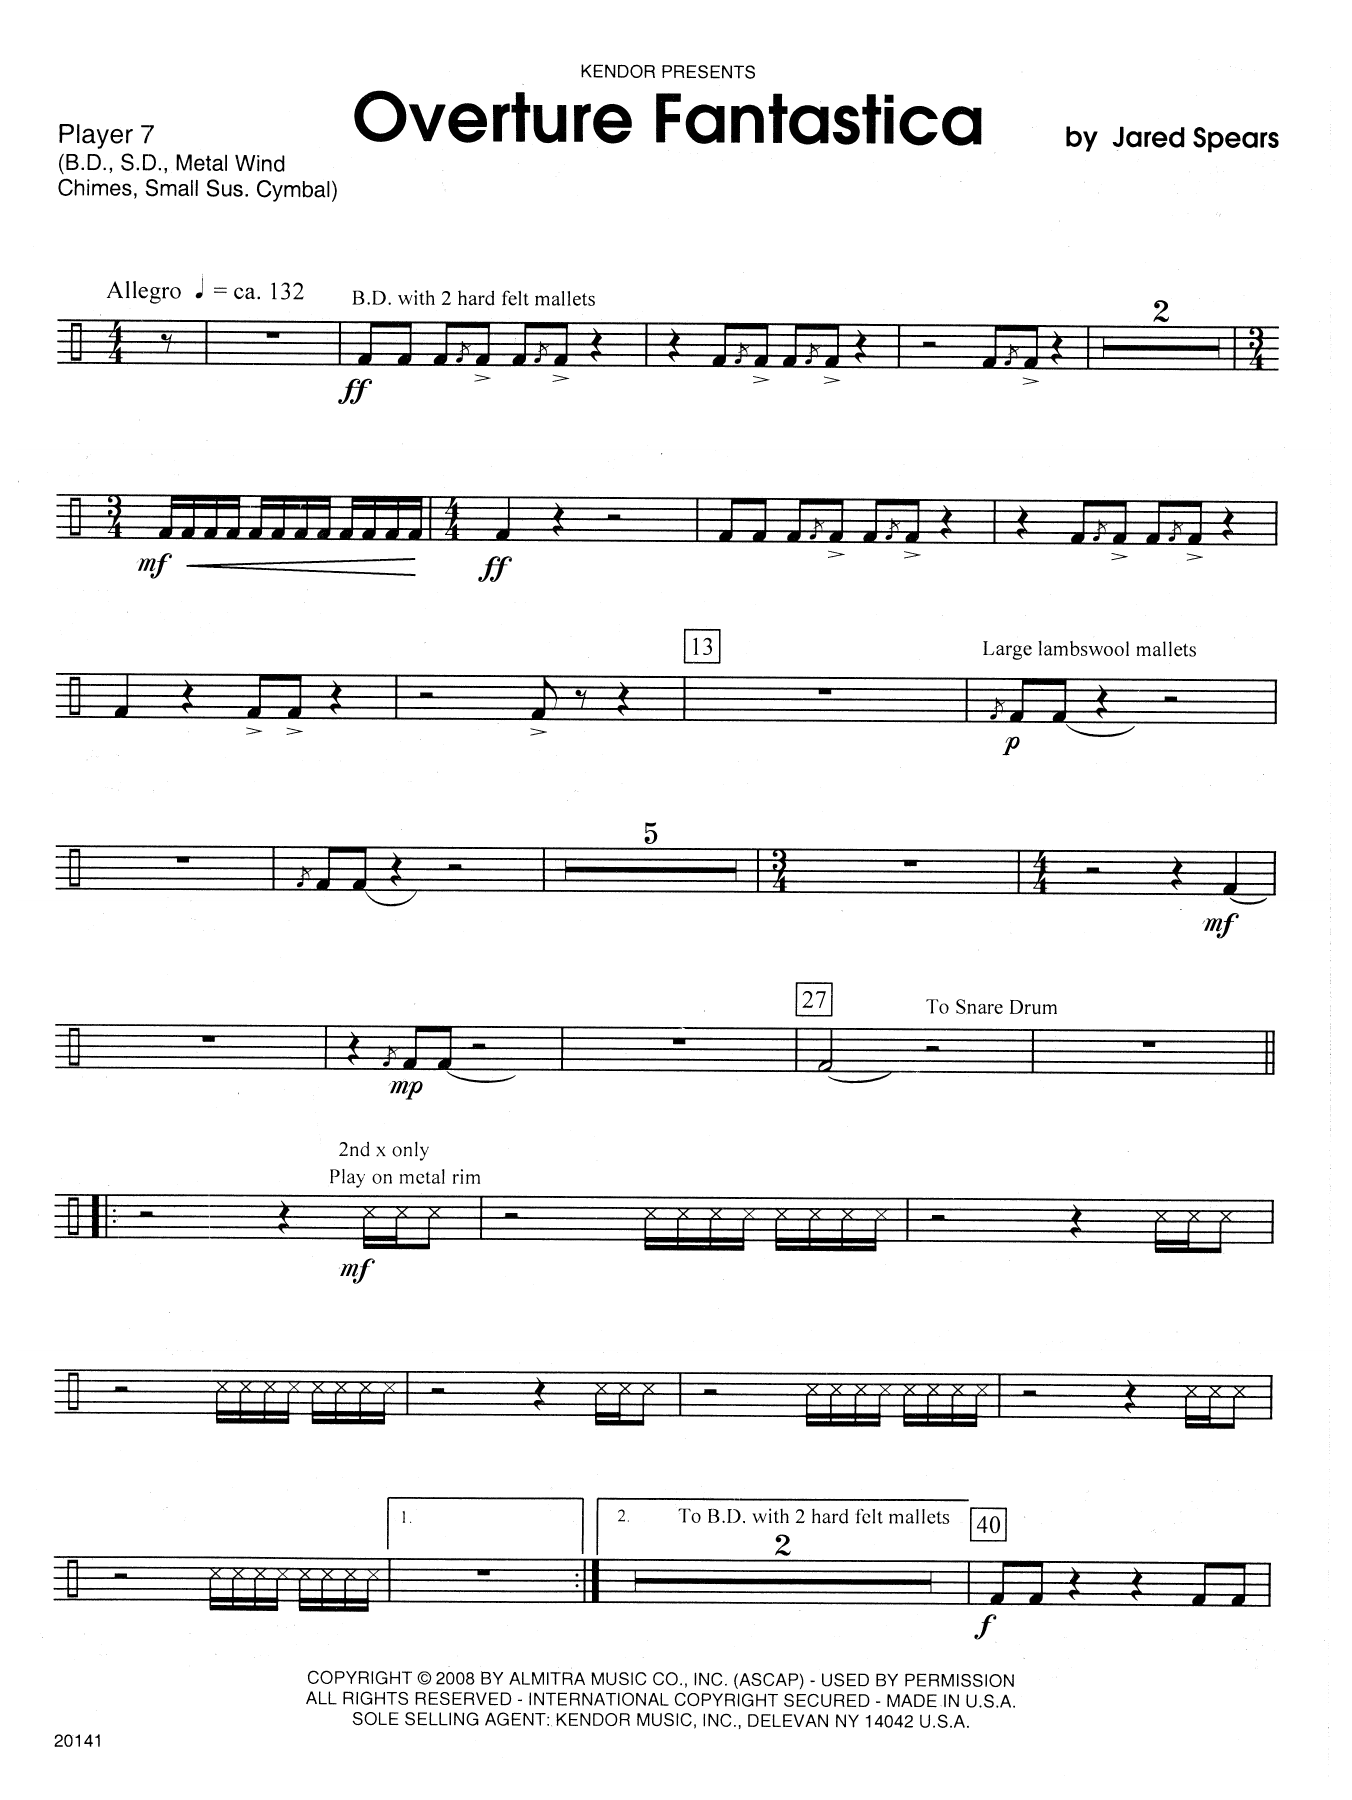 Download Jared Spears Overture Fantastica - Percussion 7 Sheet Music